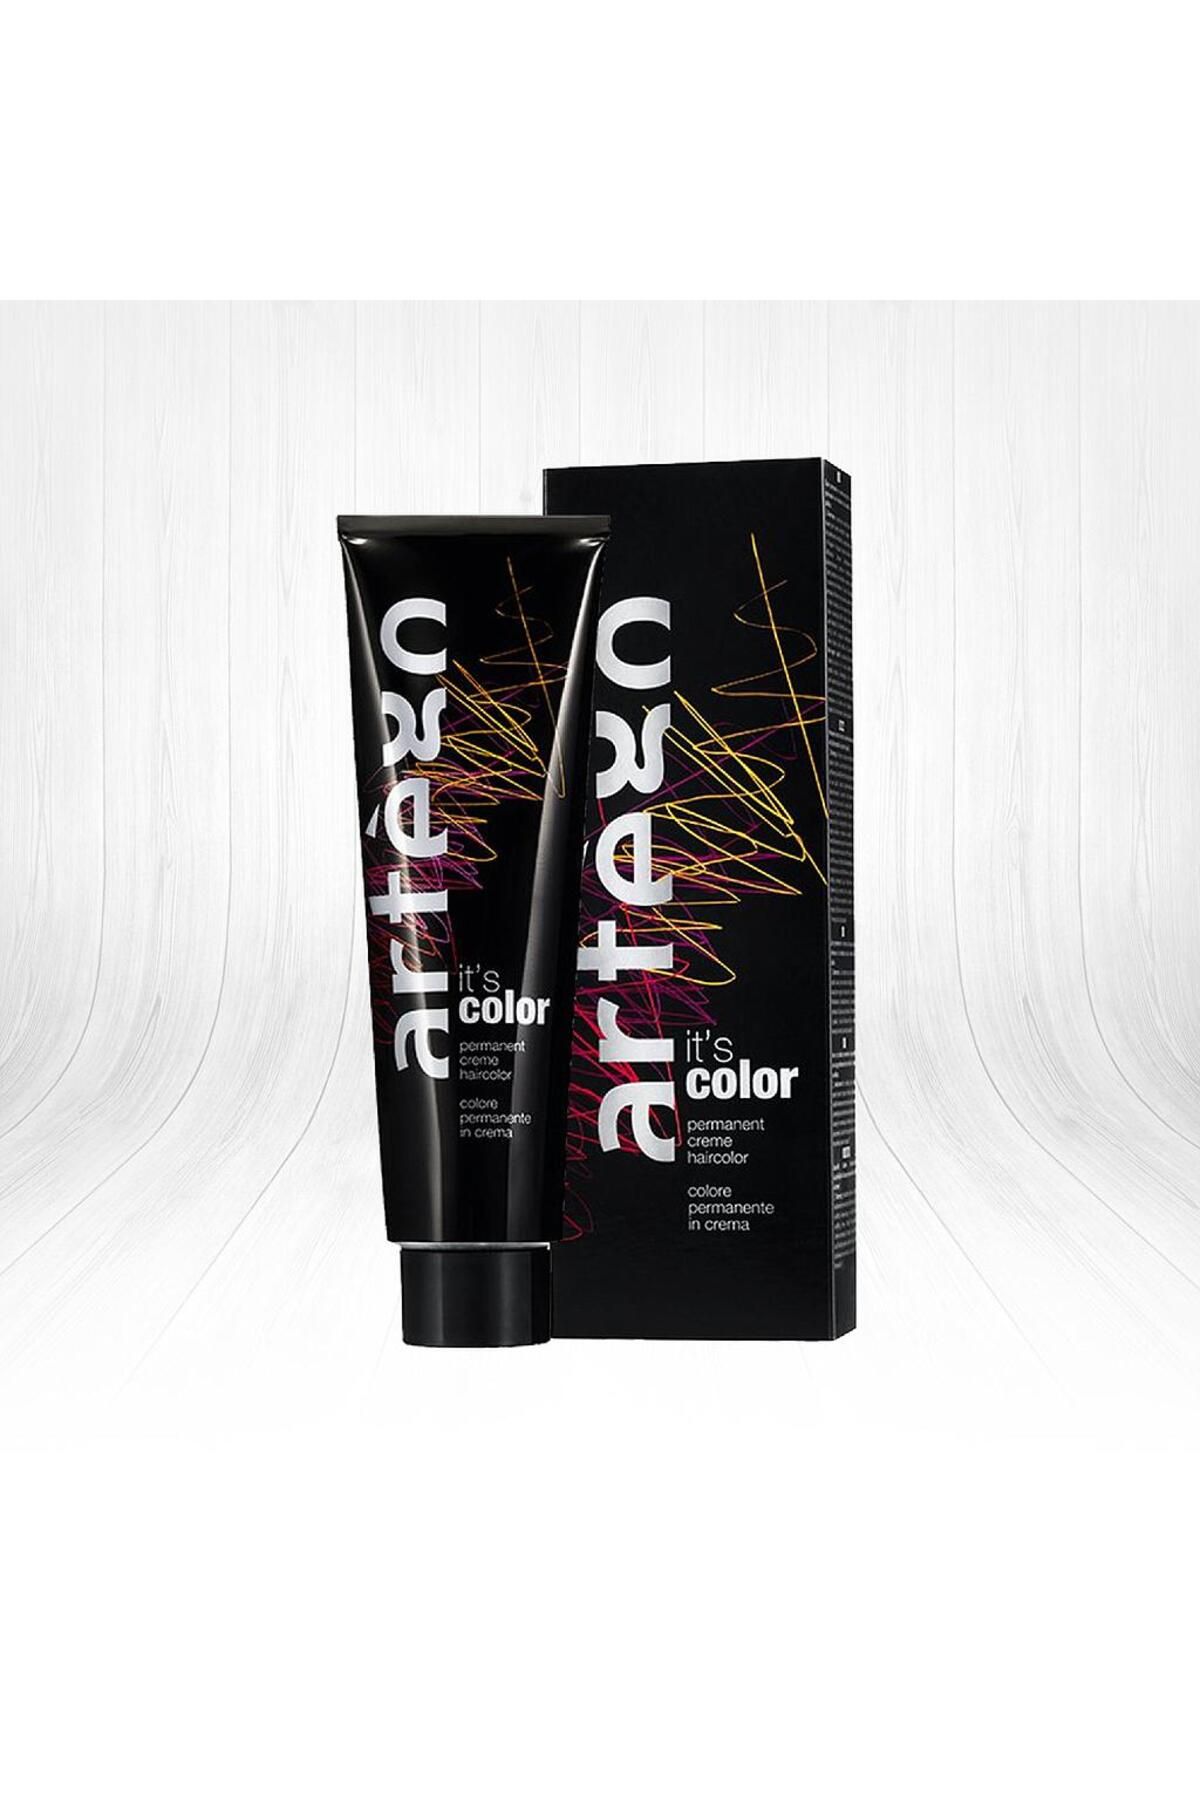 Artego NEW 5.00 (5NN) IT'S COLOR LIGHT COLD BROWN 150ML.